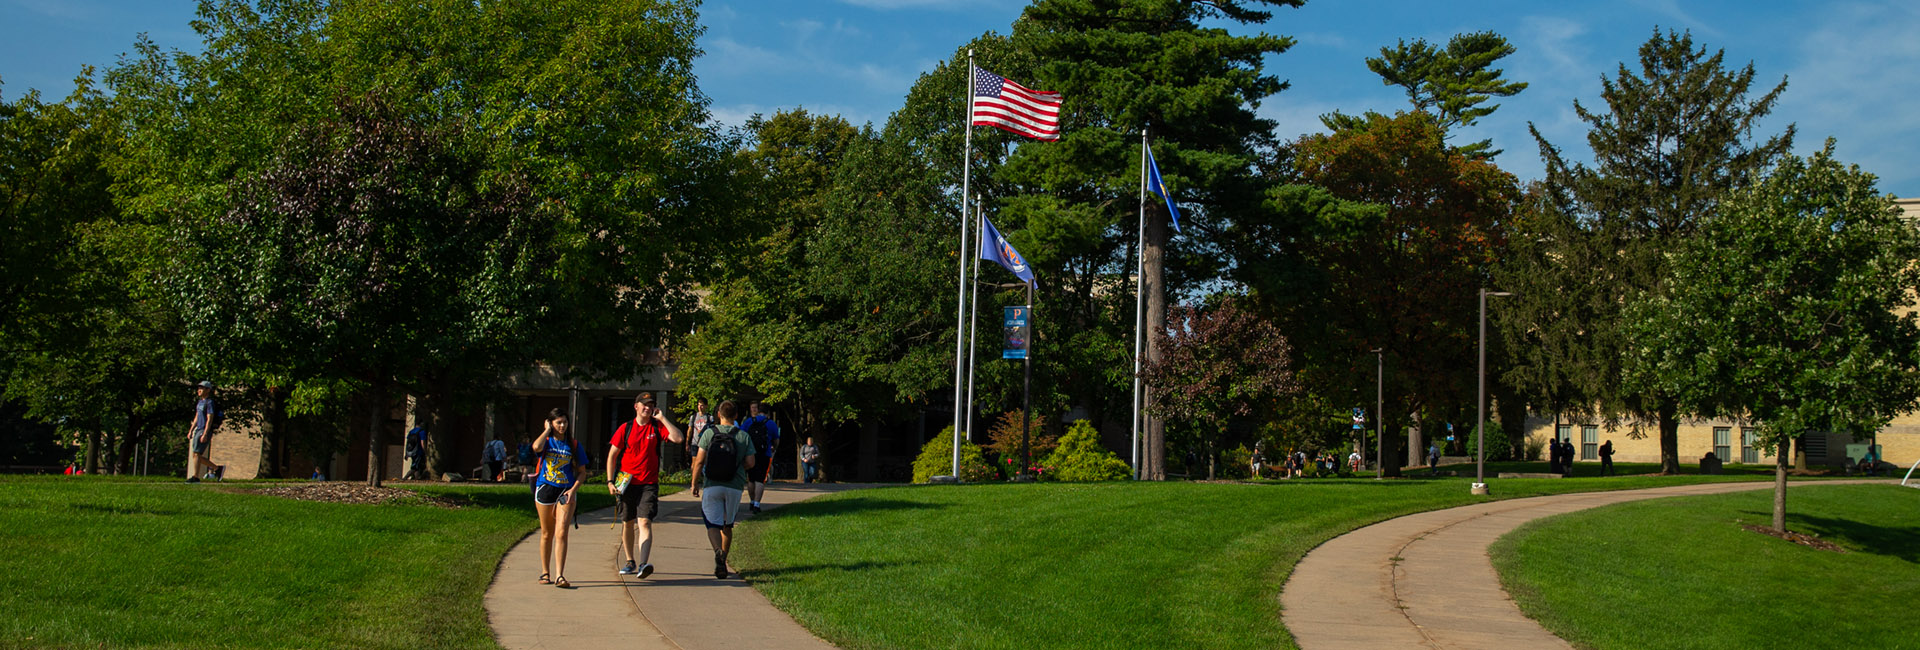 Students walking with flags in the background